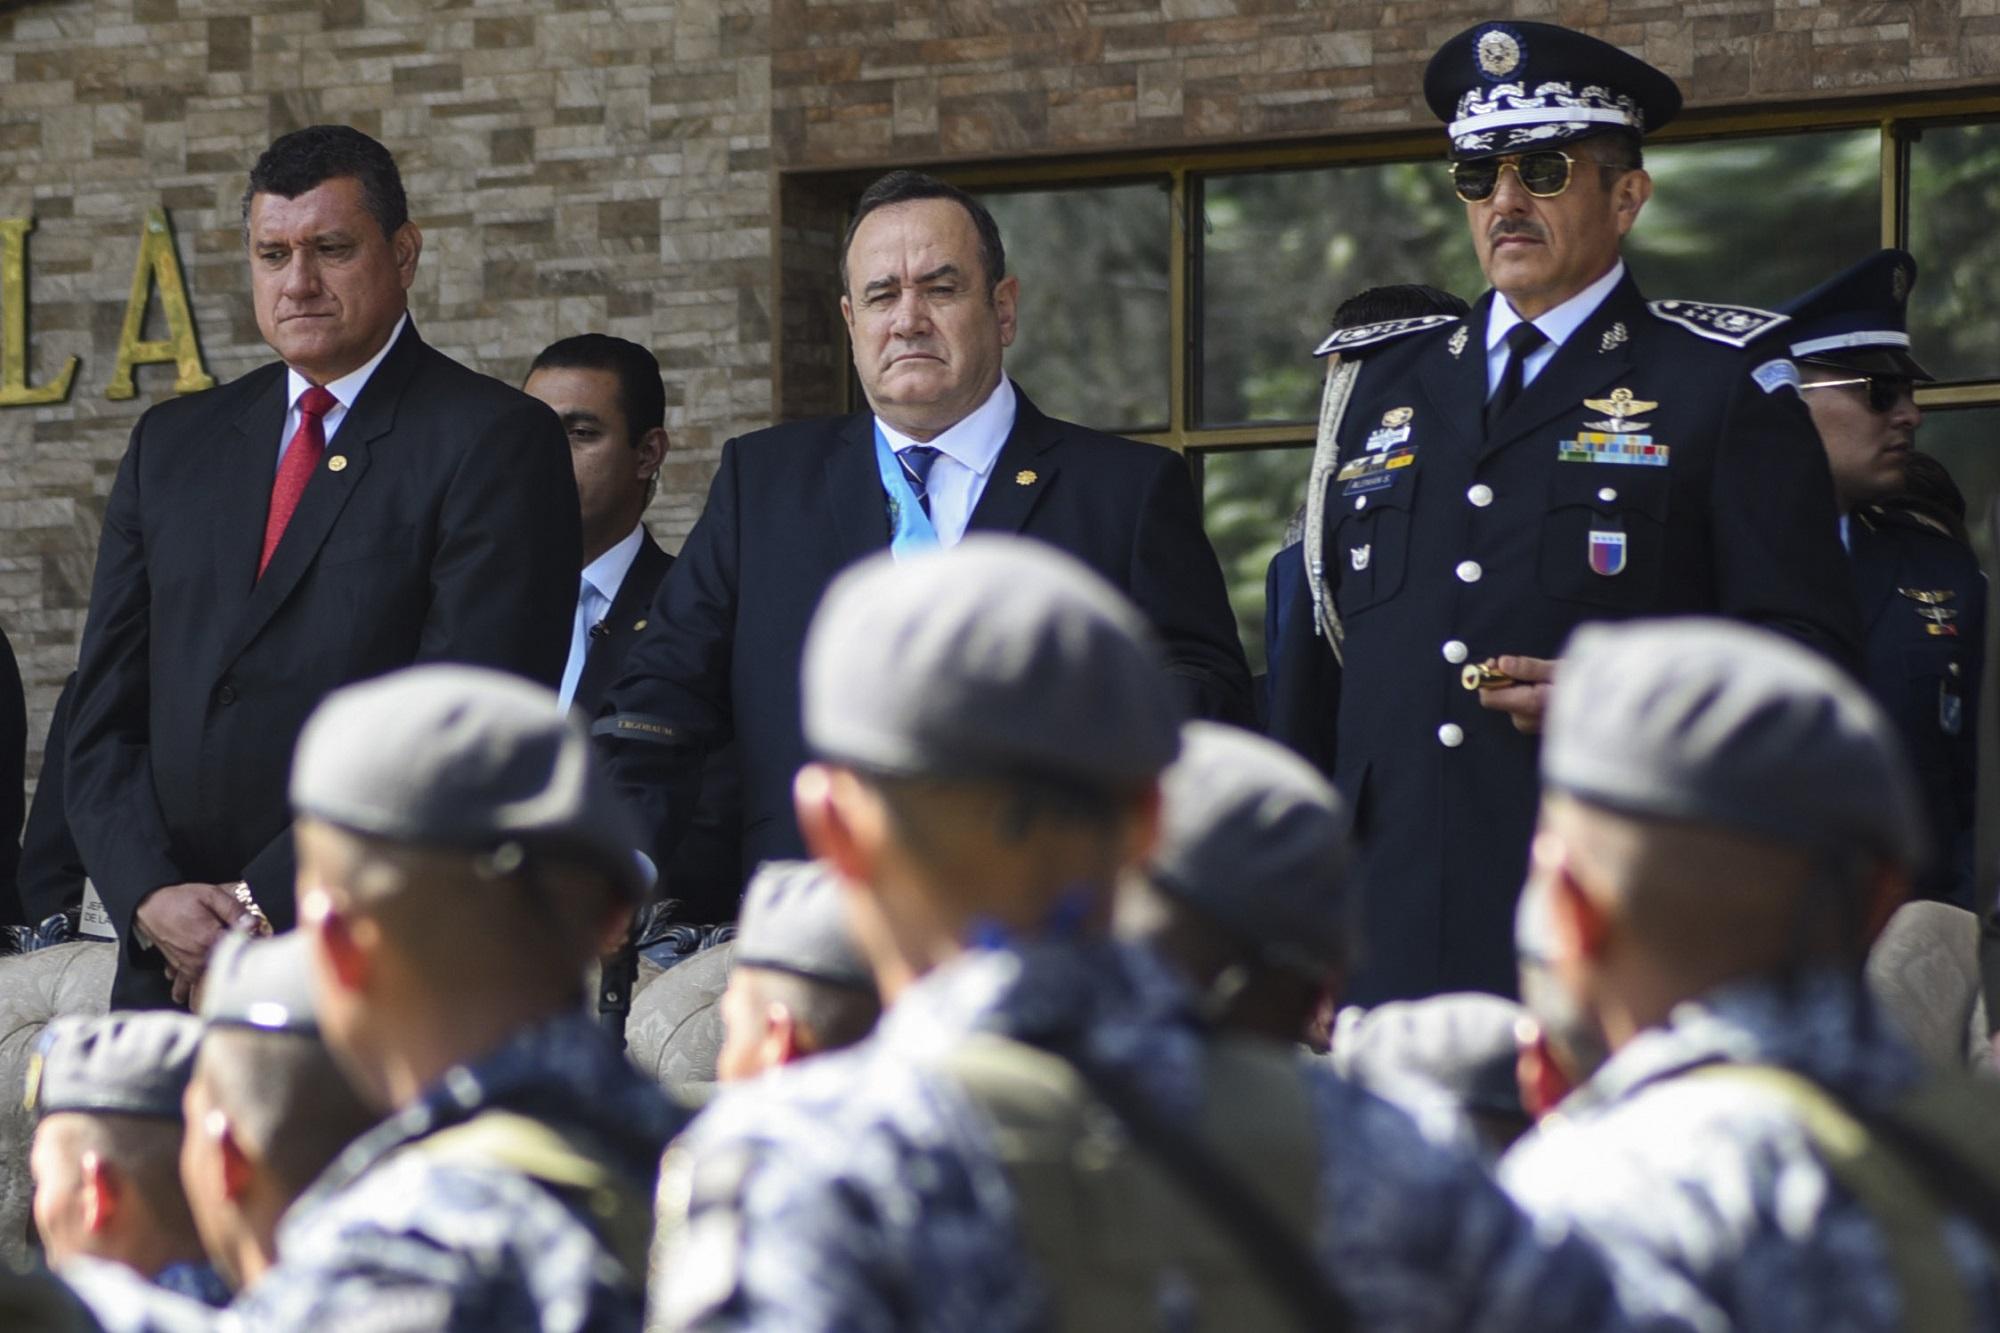 Alejandro Giammattei, middle, during his inaugural ceremony before the Armed Forces at the Mariscal Zavala military base in Guatemala City on January 15, 2020, one day after his inauguration as the newest president of the Republic of Guatemala. Photo: Orlando Estrada/AFP.